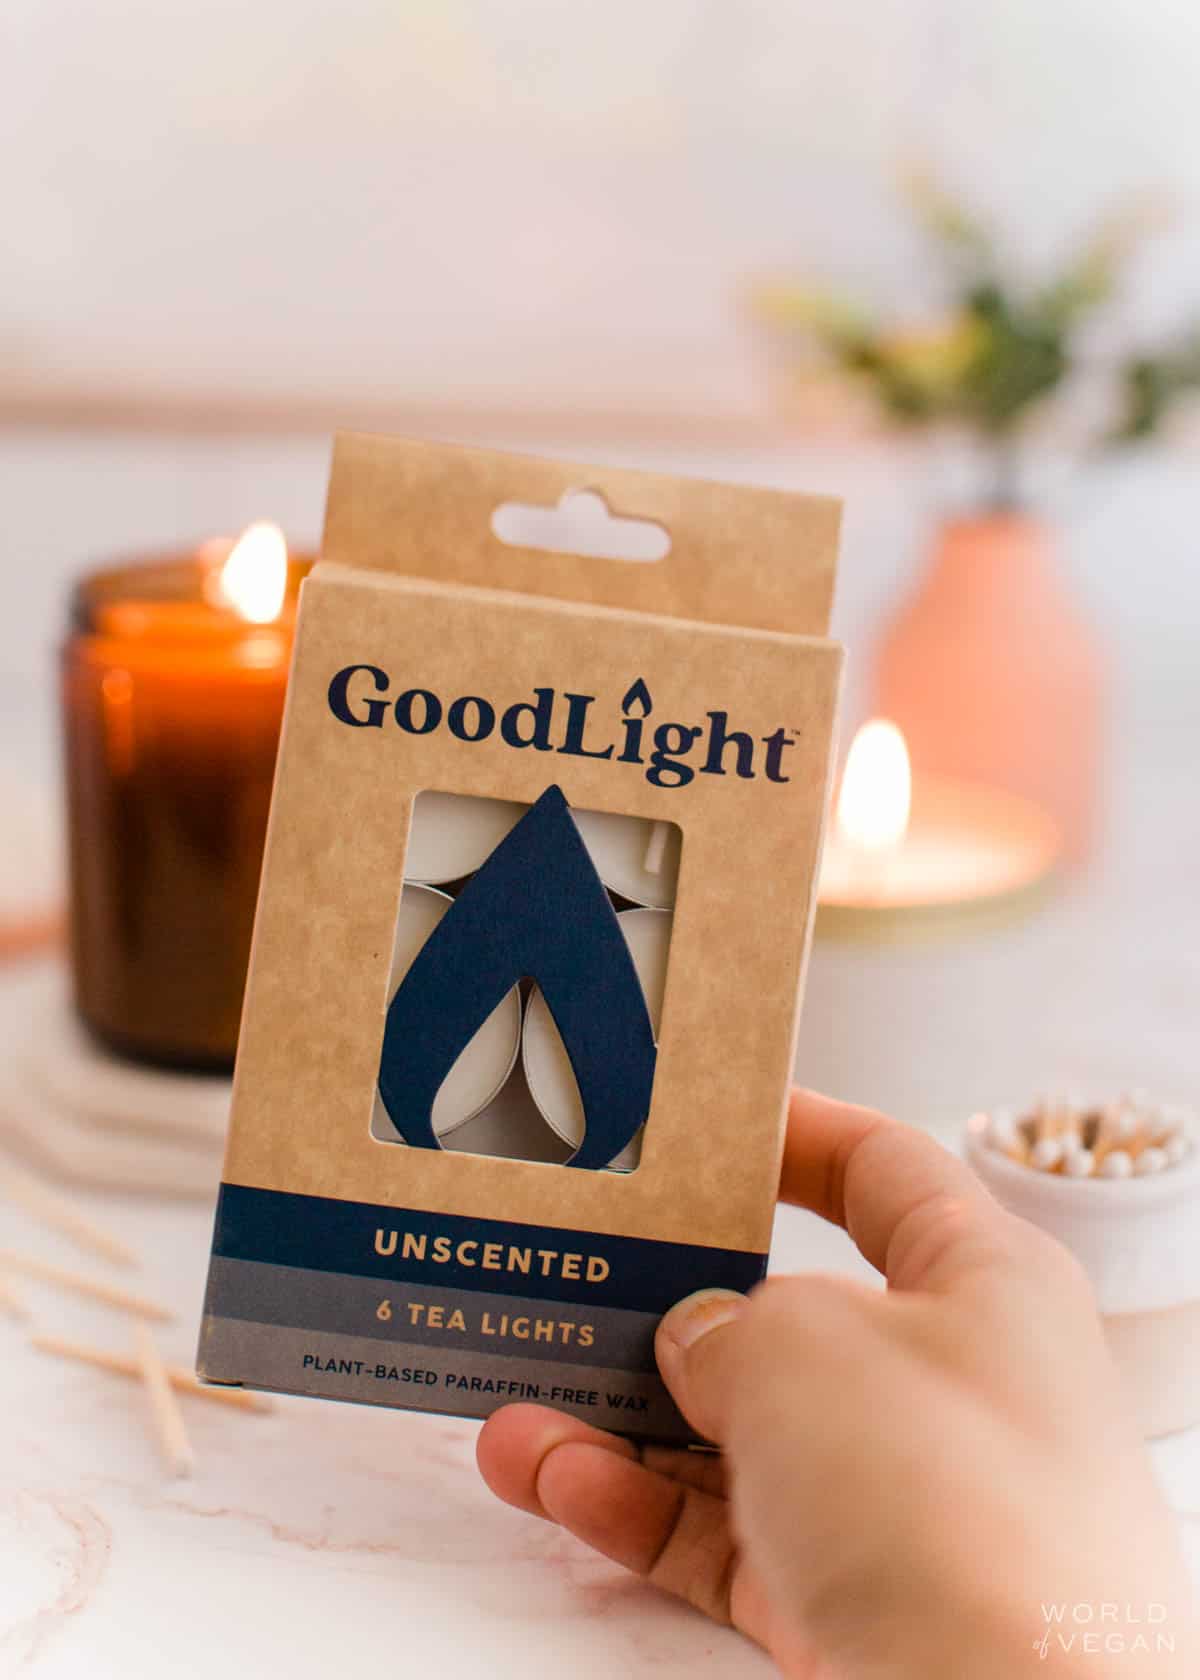 hand holding a box of plant based tea light candles from the brand GoodLight